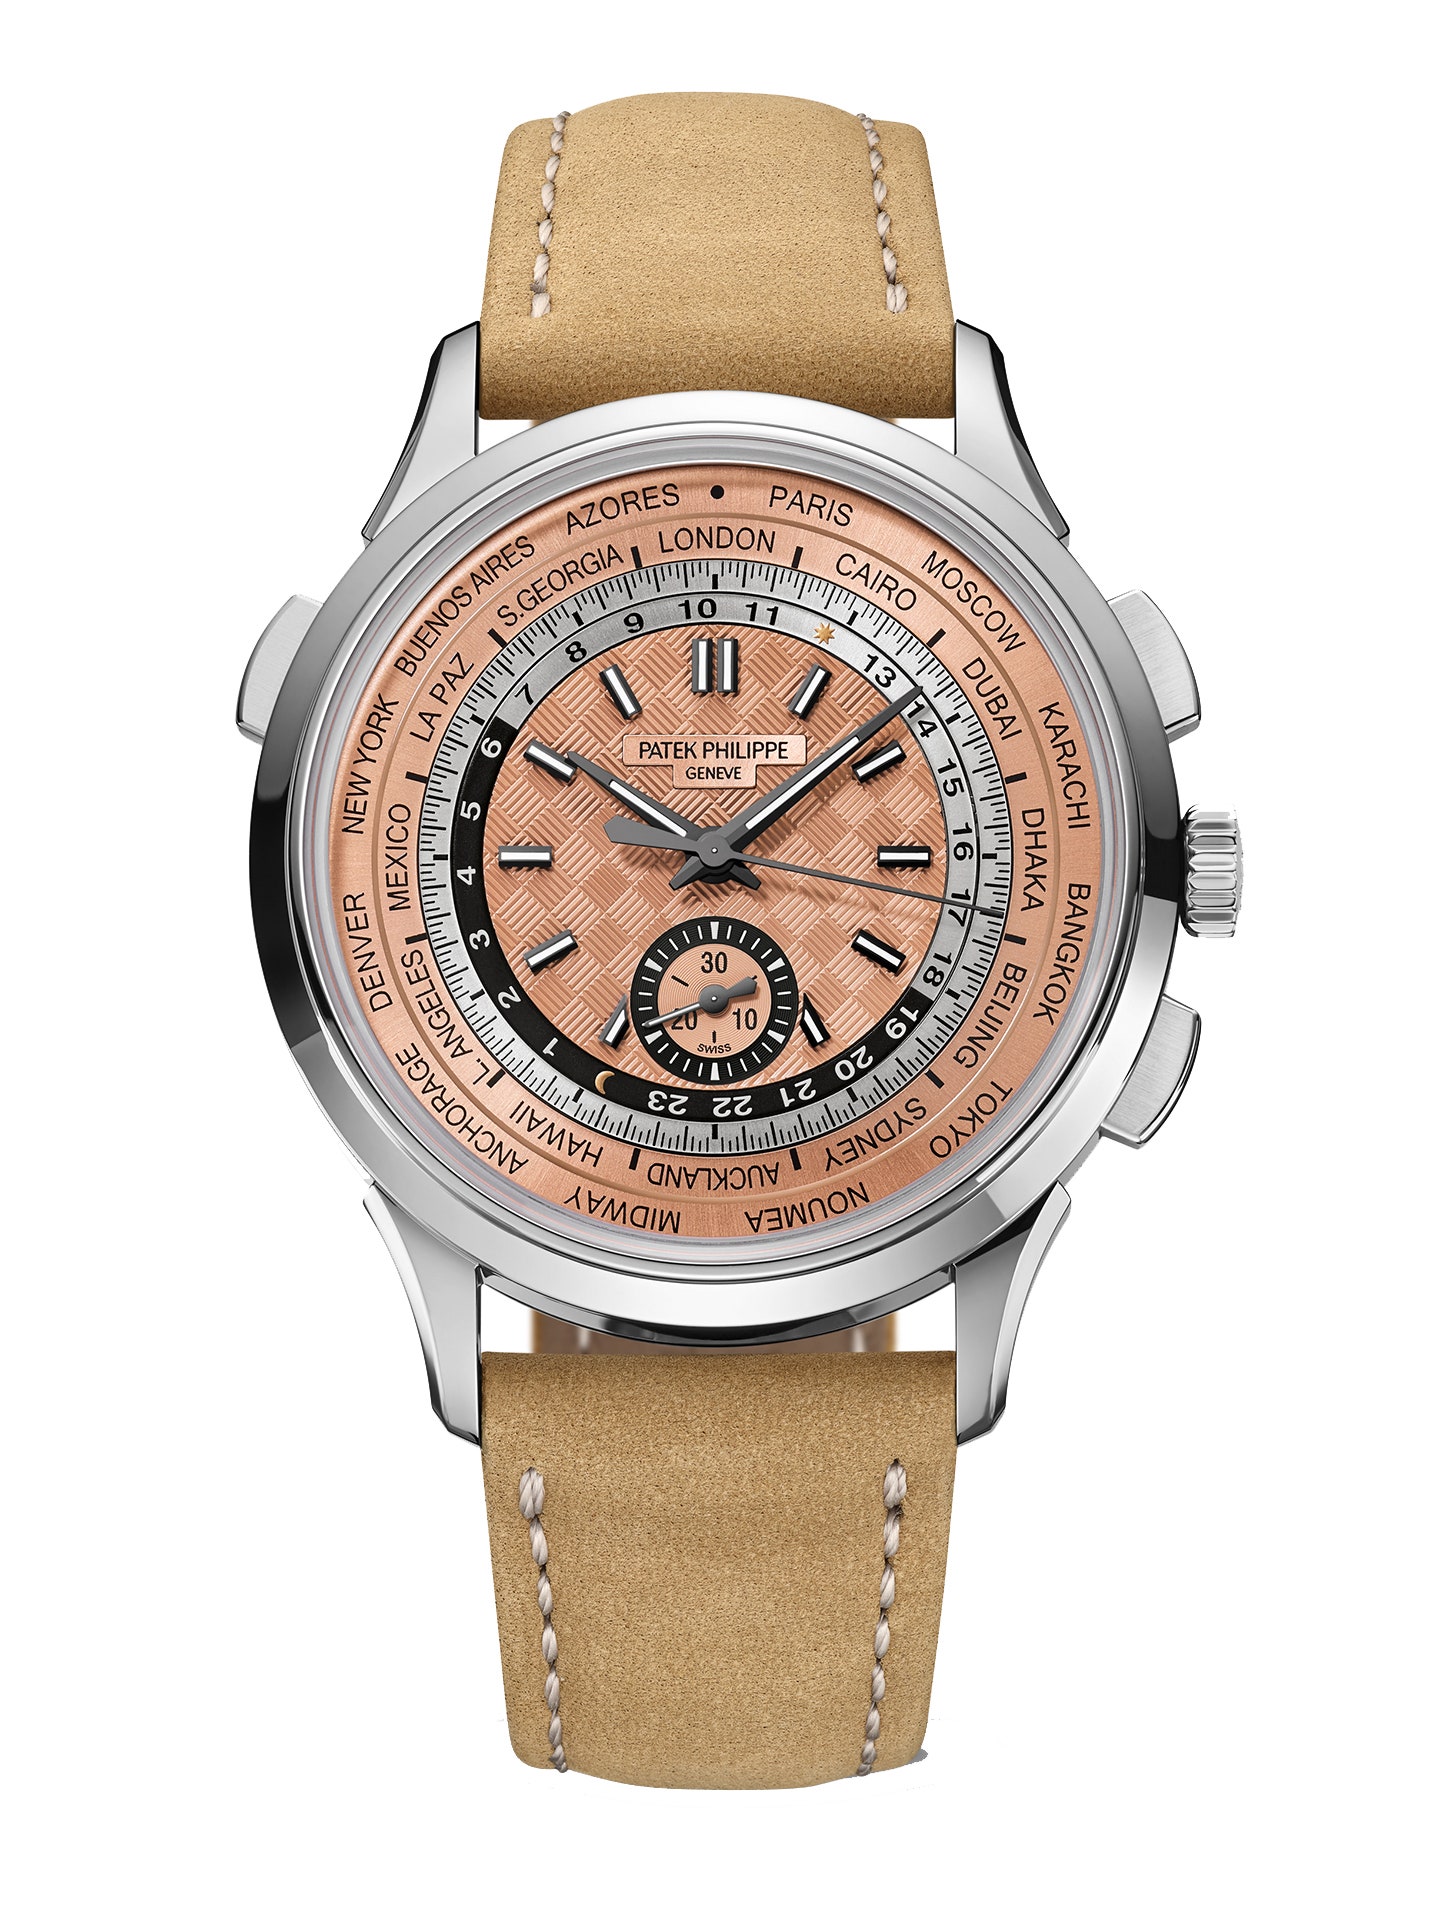 Patek Philippe's new Ref.5935 World Time Flyback Chronograph